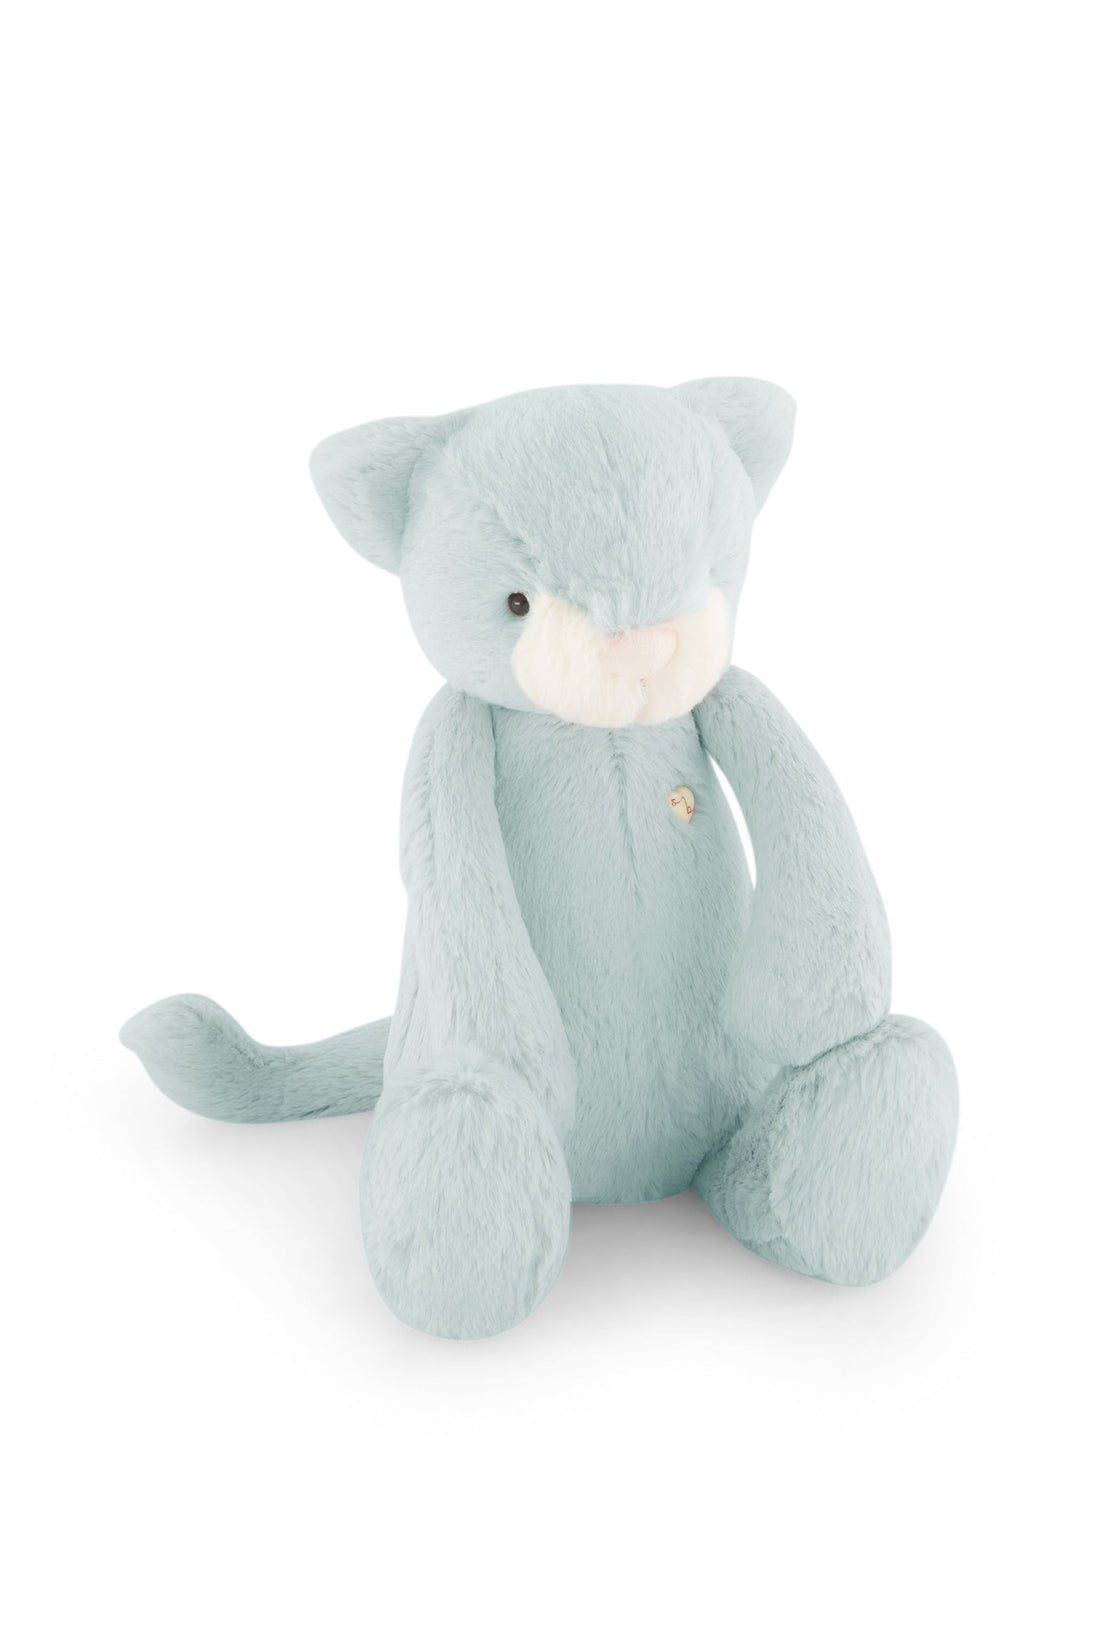 Snuggle Bunnies - Elsie the Kitty - Sprout Childrens Toy from Jamie Kay NZ